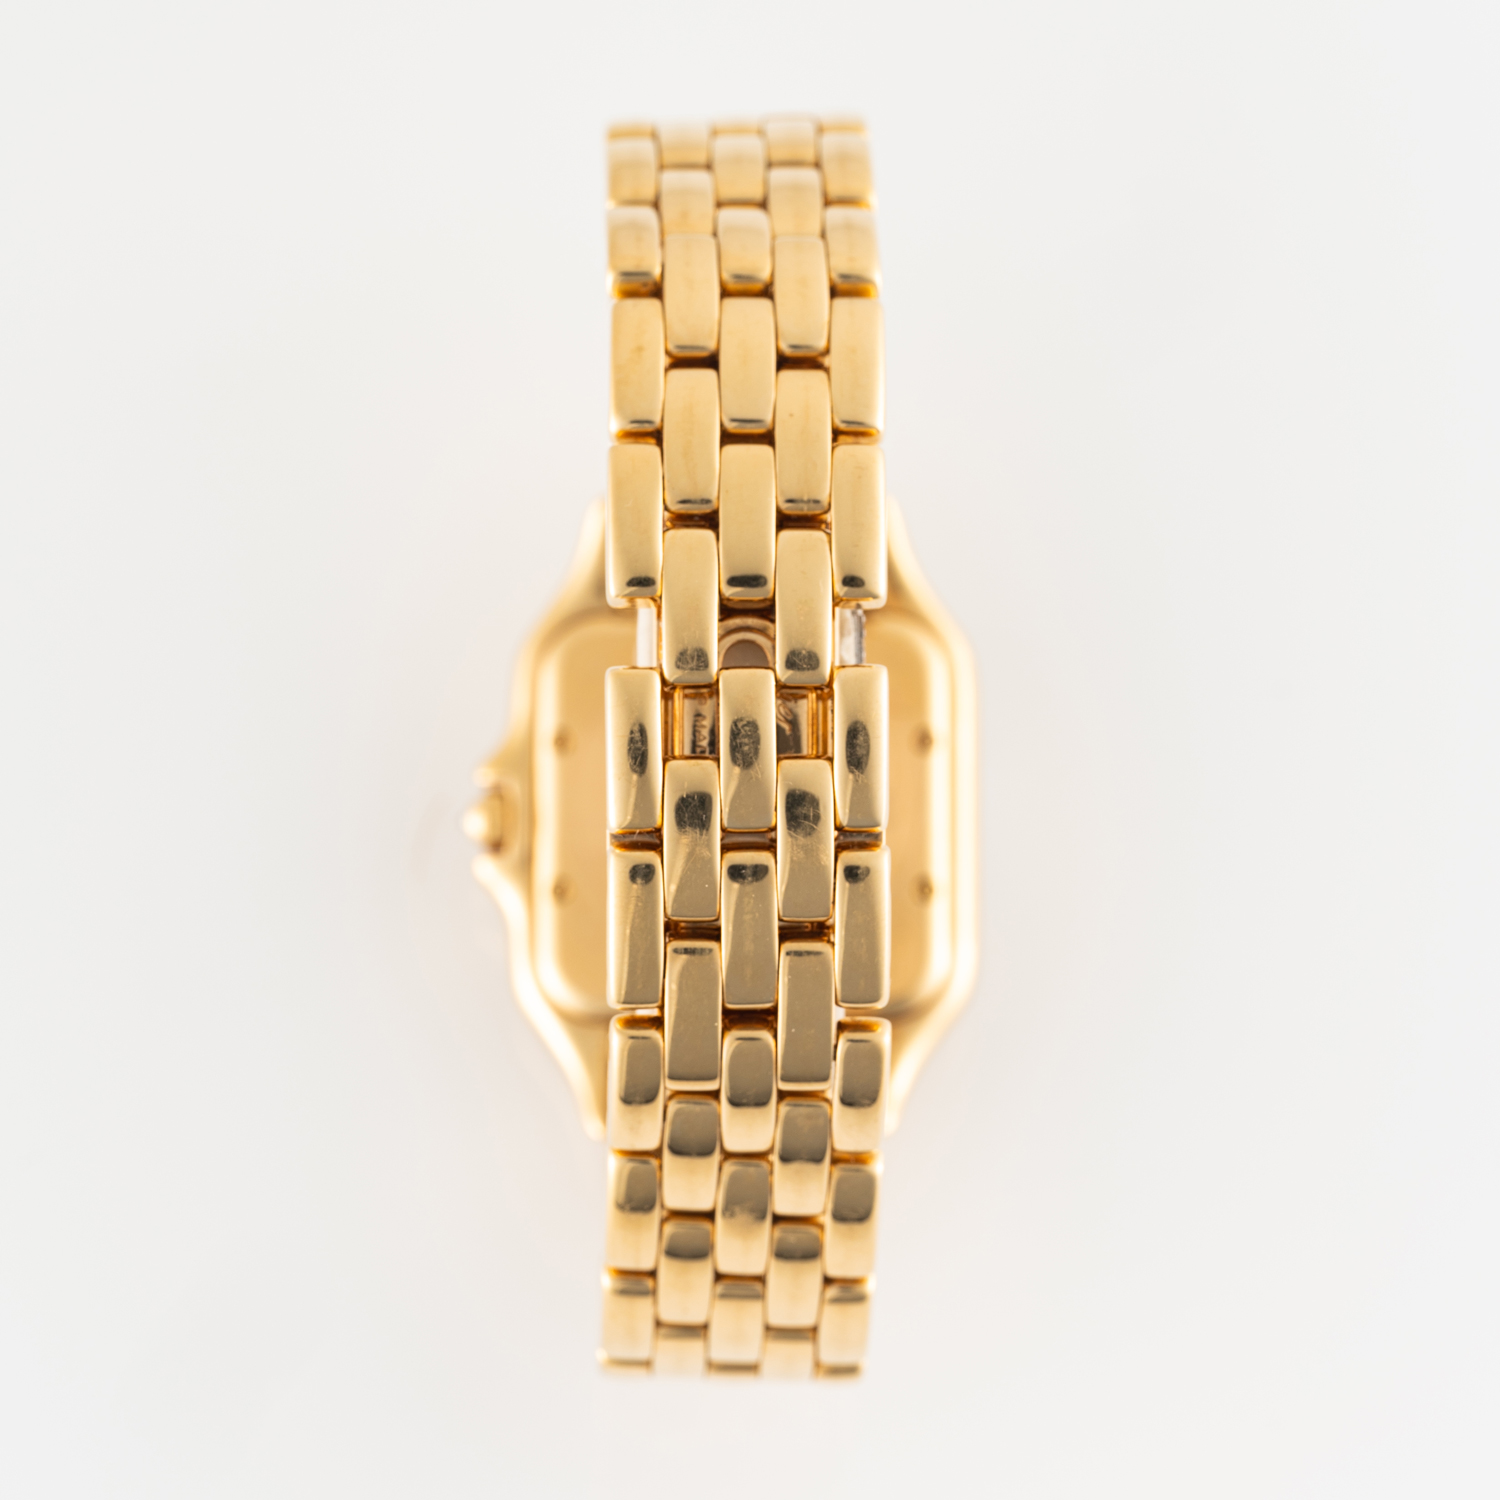 A RARE GENTLEMAN'S SIZE 18K SOLID GOLD & DIAMOND CARTIER PANTHERE BRACELET WATCH CIRCA 1990, REF. - Image 9 of 9